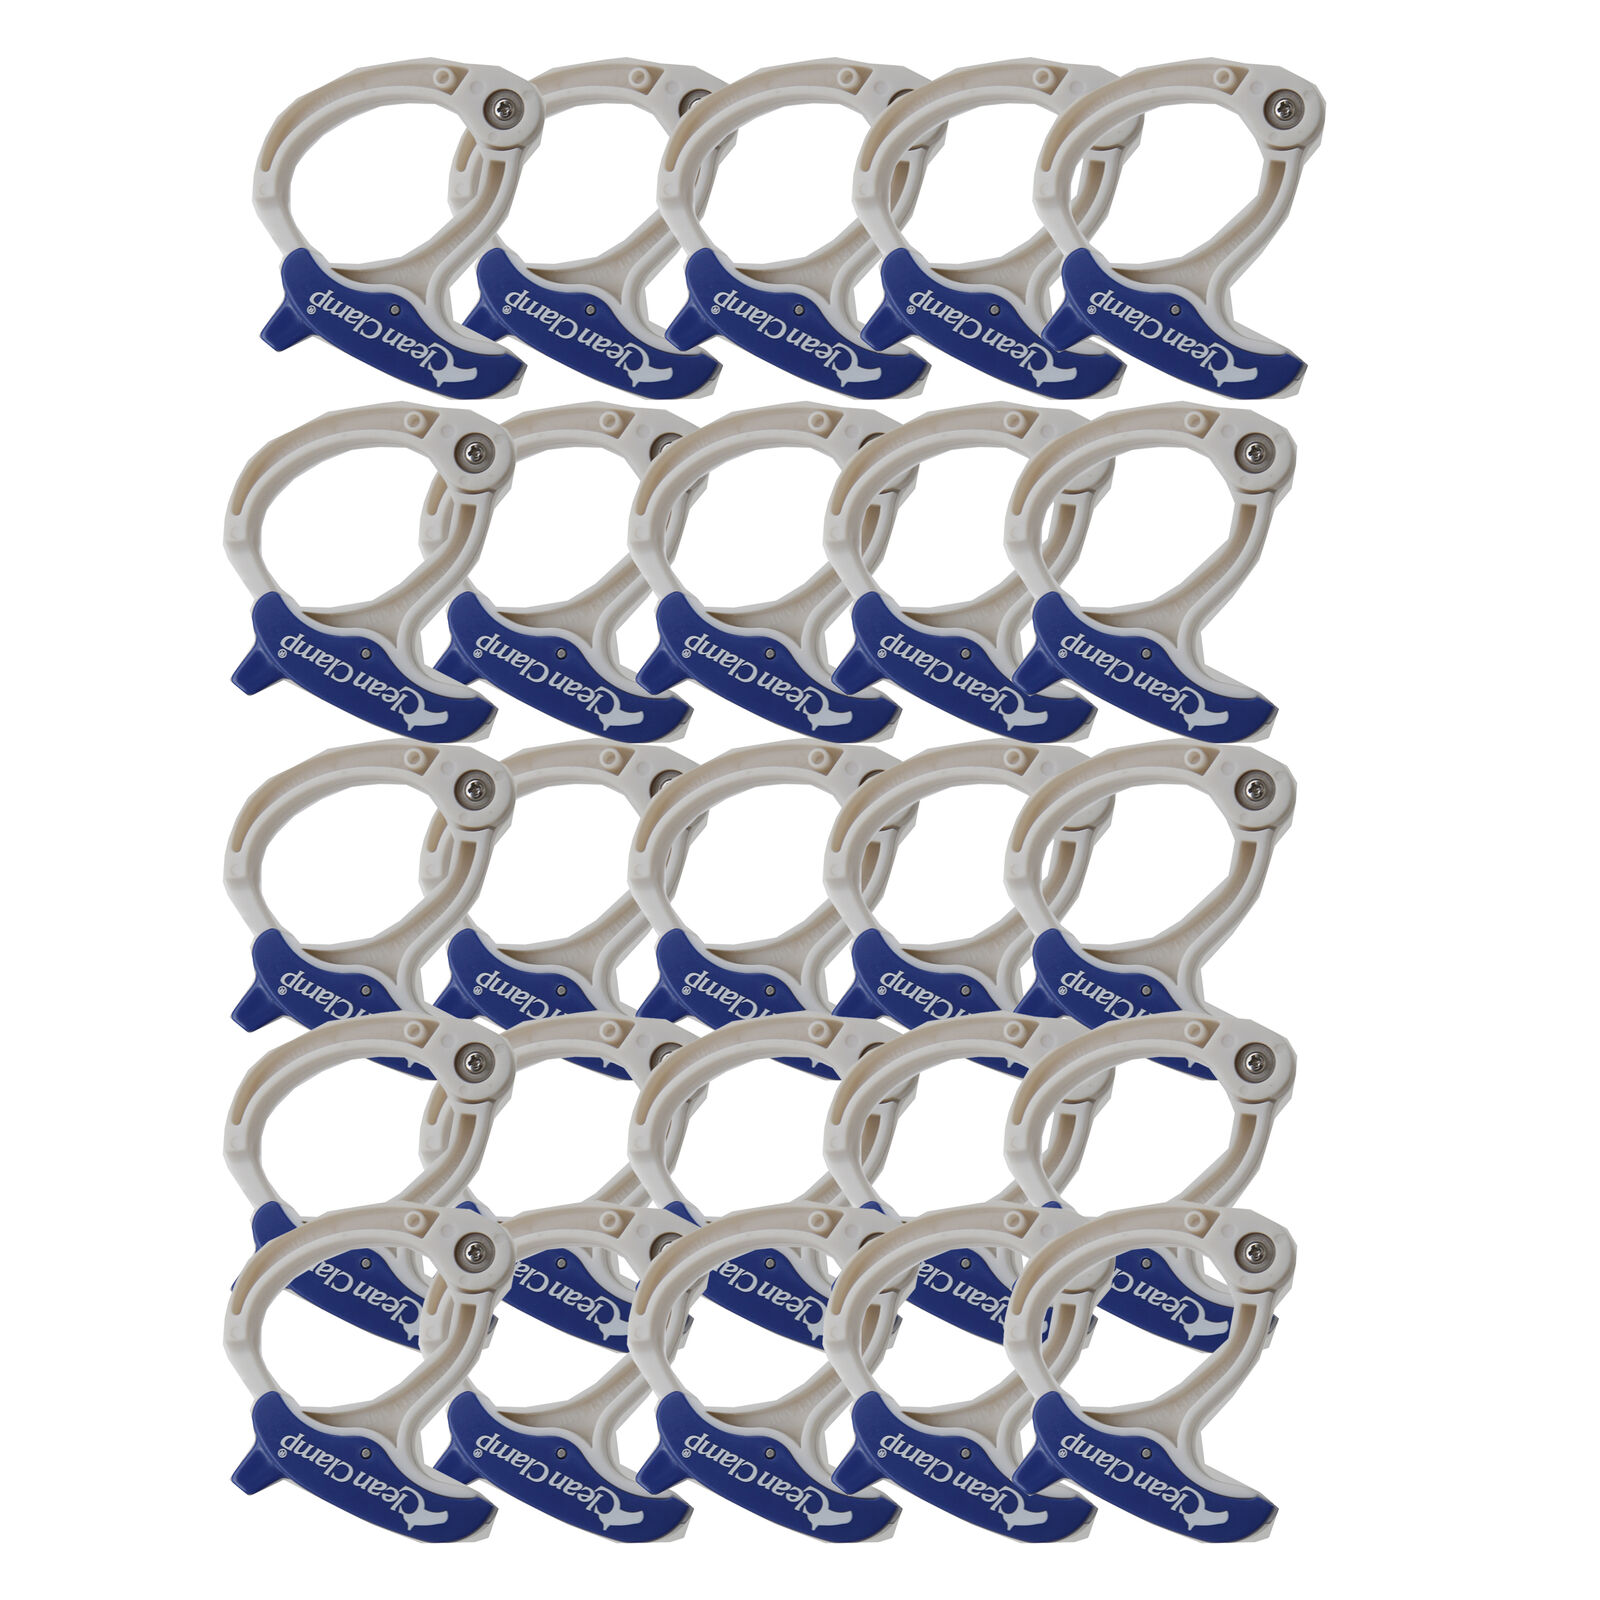 (25 Pack) Cable Clamp Sea Clamp Medium Blue Cable Management Organization